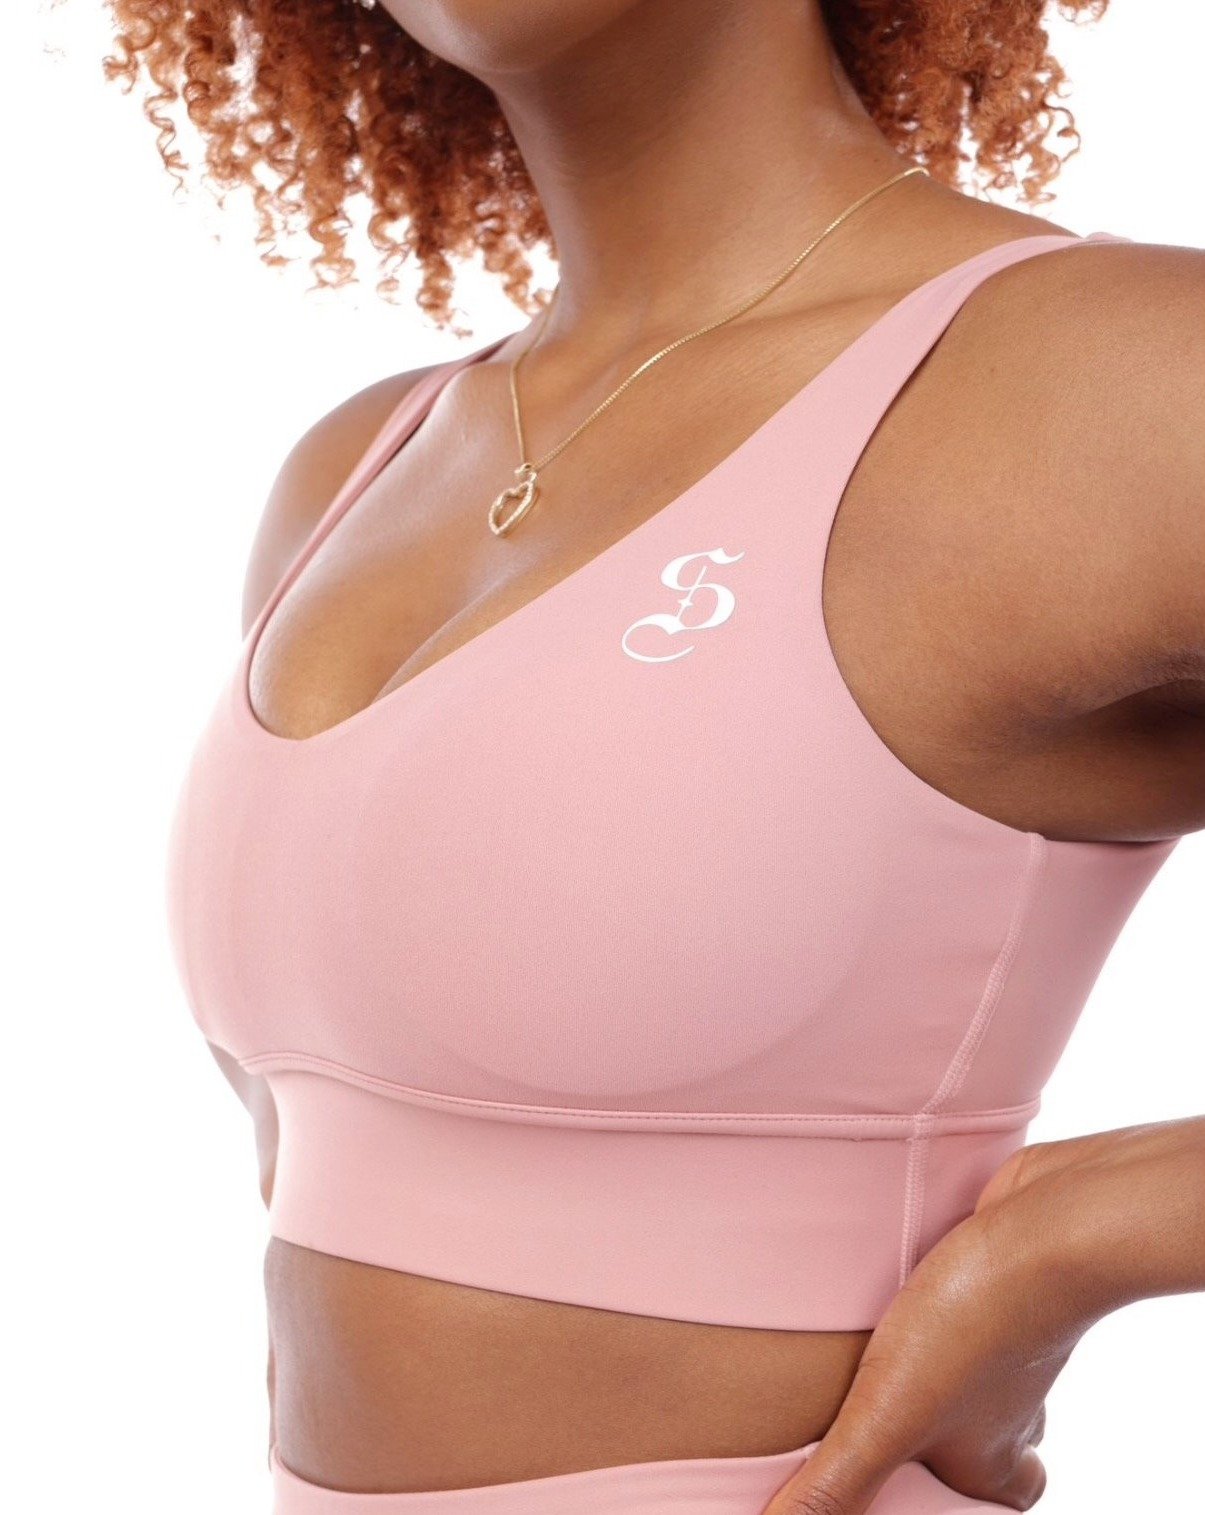  Lfzhjzc Sports Bras for Women, Stretch High Impact Super  Comfort Bra, Fixed Chest Pad Quick Dry Shockproof Workout Tank Tops (Color  : Pink, Size : XX-Large) : Clothing, Shoes & Jewelry